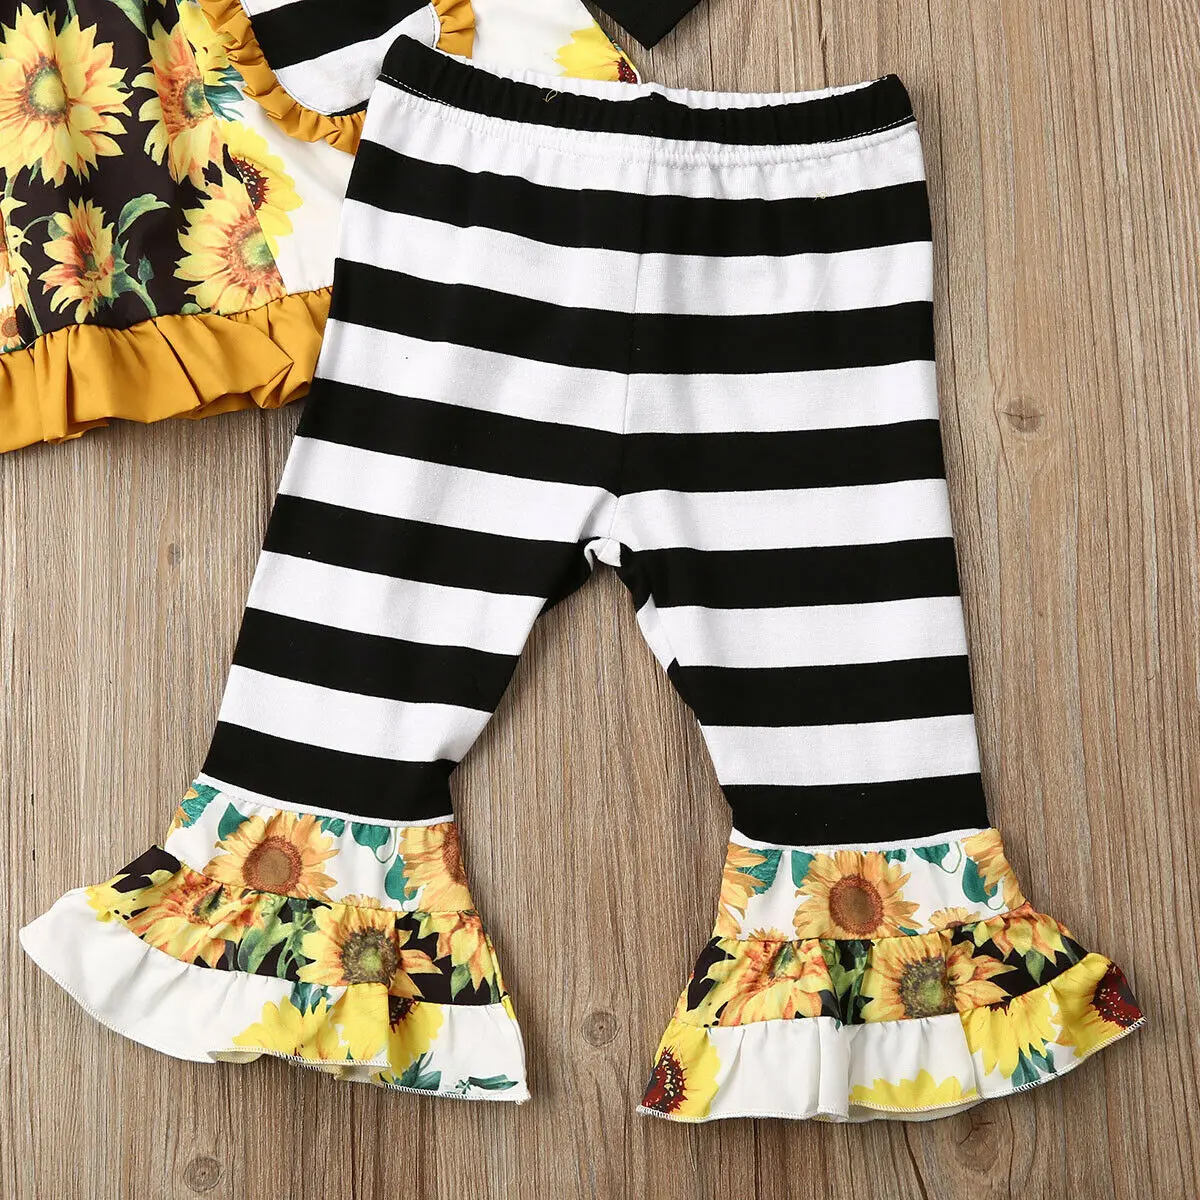 Baby Spring Autumn Clothing 2PCS Toddler Baby Girl Winter Clothes Sunflower Ruffled Tops Dress Striped Pants Outfits 1-6T